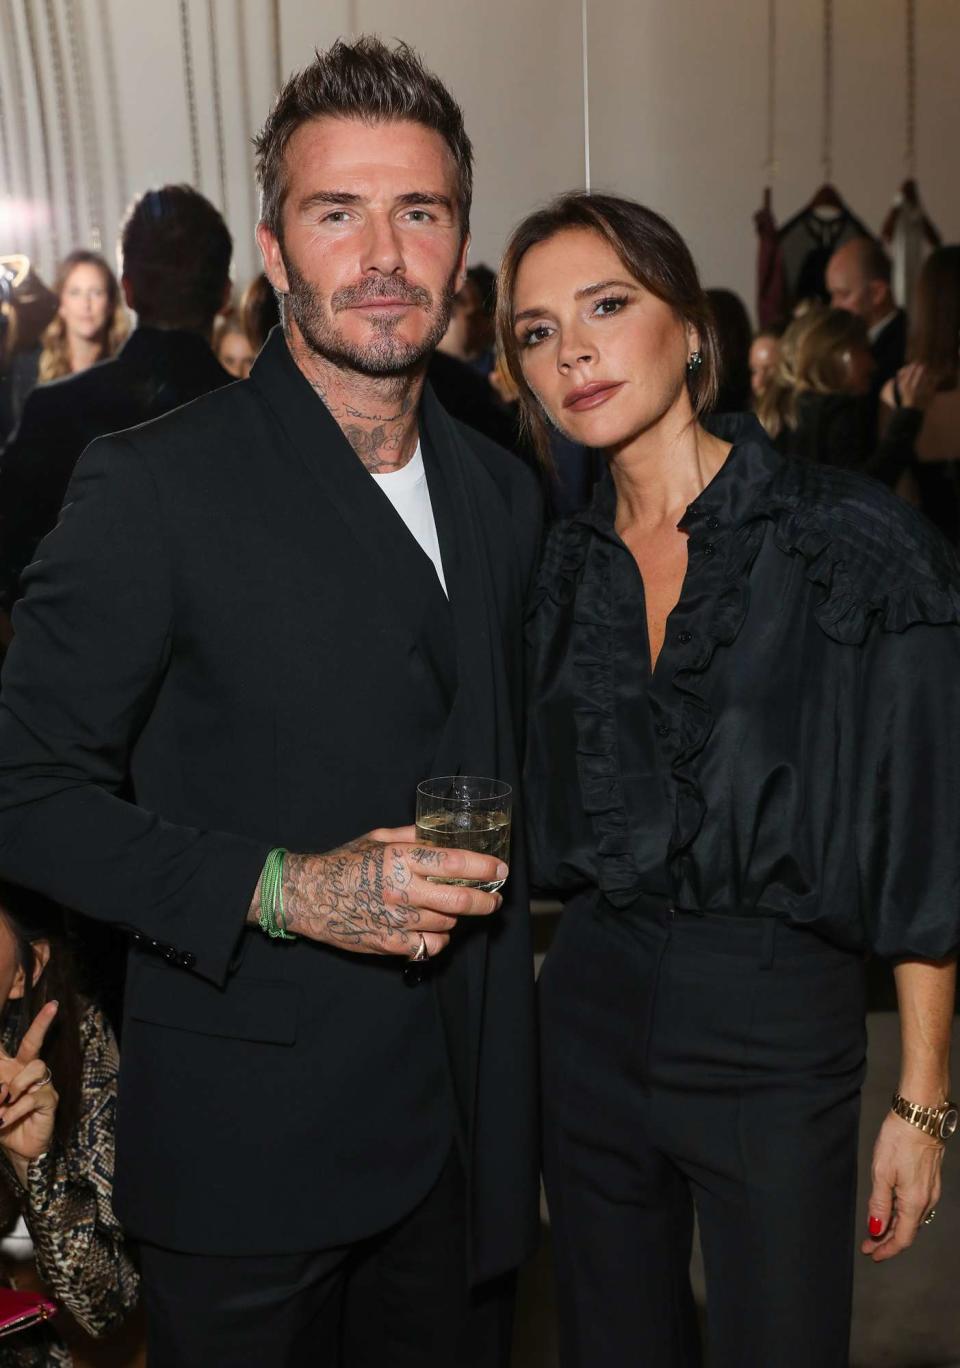 David and Victoria Beckham attend Victoria Beckham and Sotheby's celebration of Andy Warhol with Don Julio 1942 at her Dover Street store, on September 30, 2019 in London, England